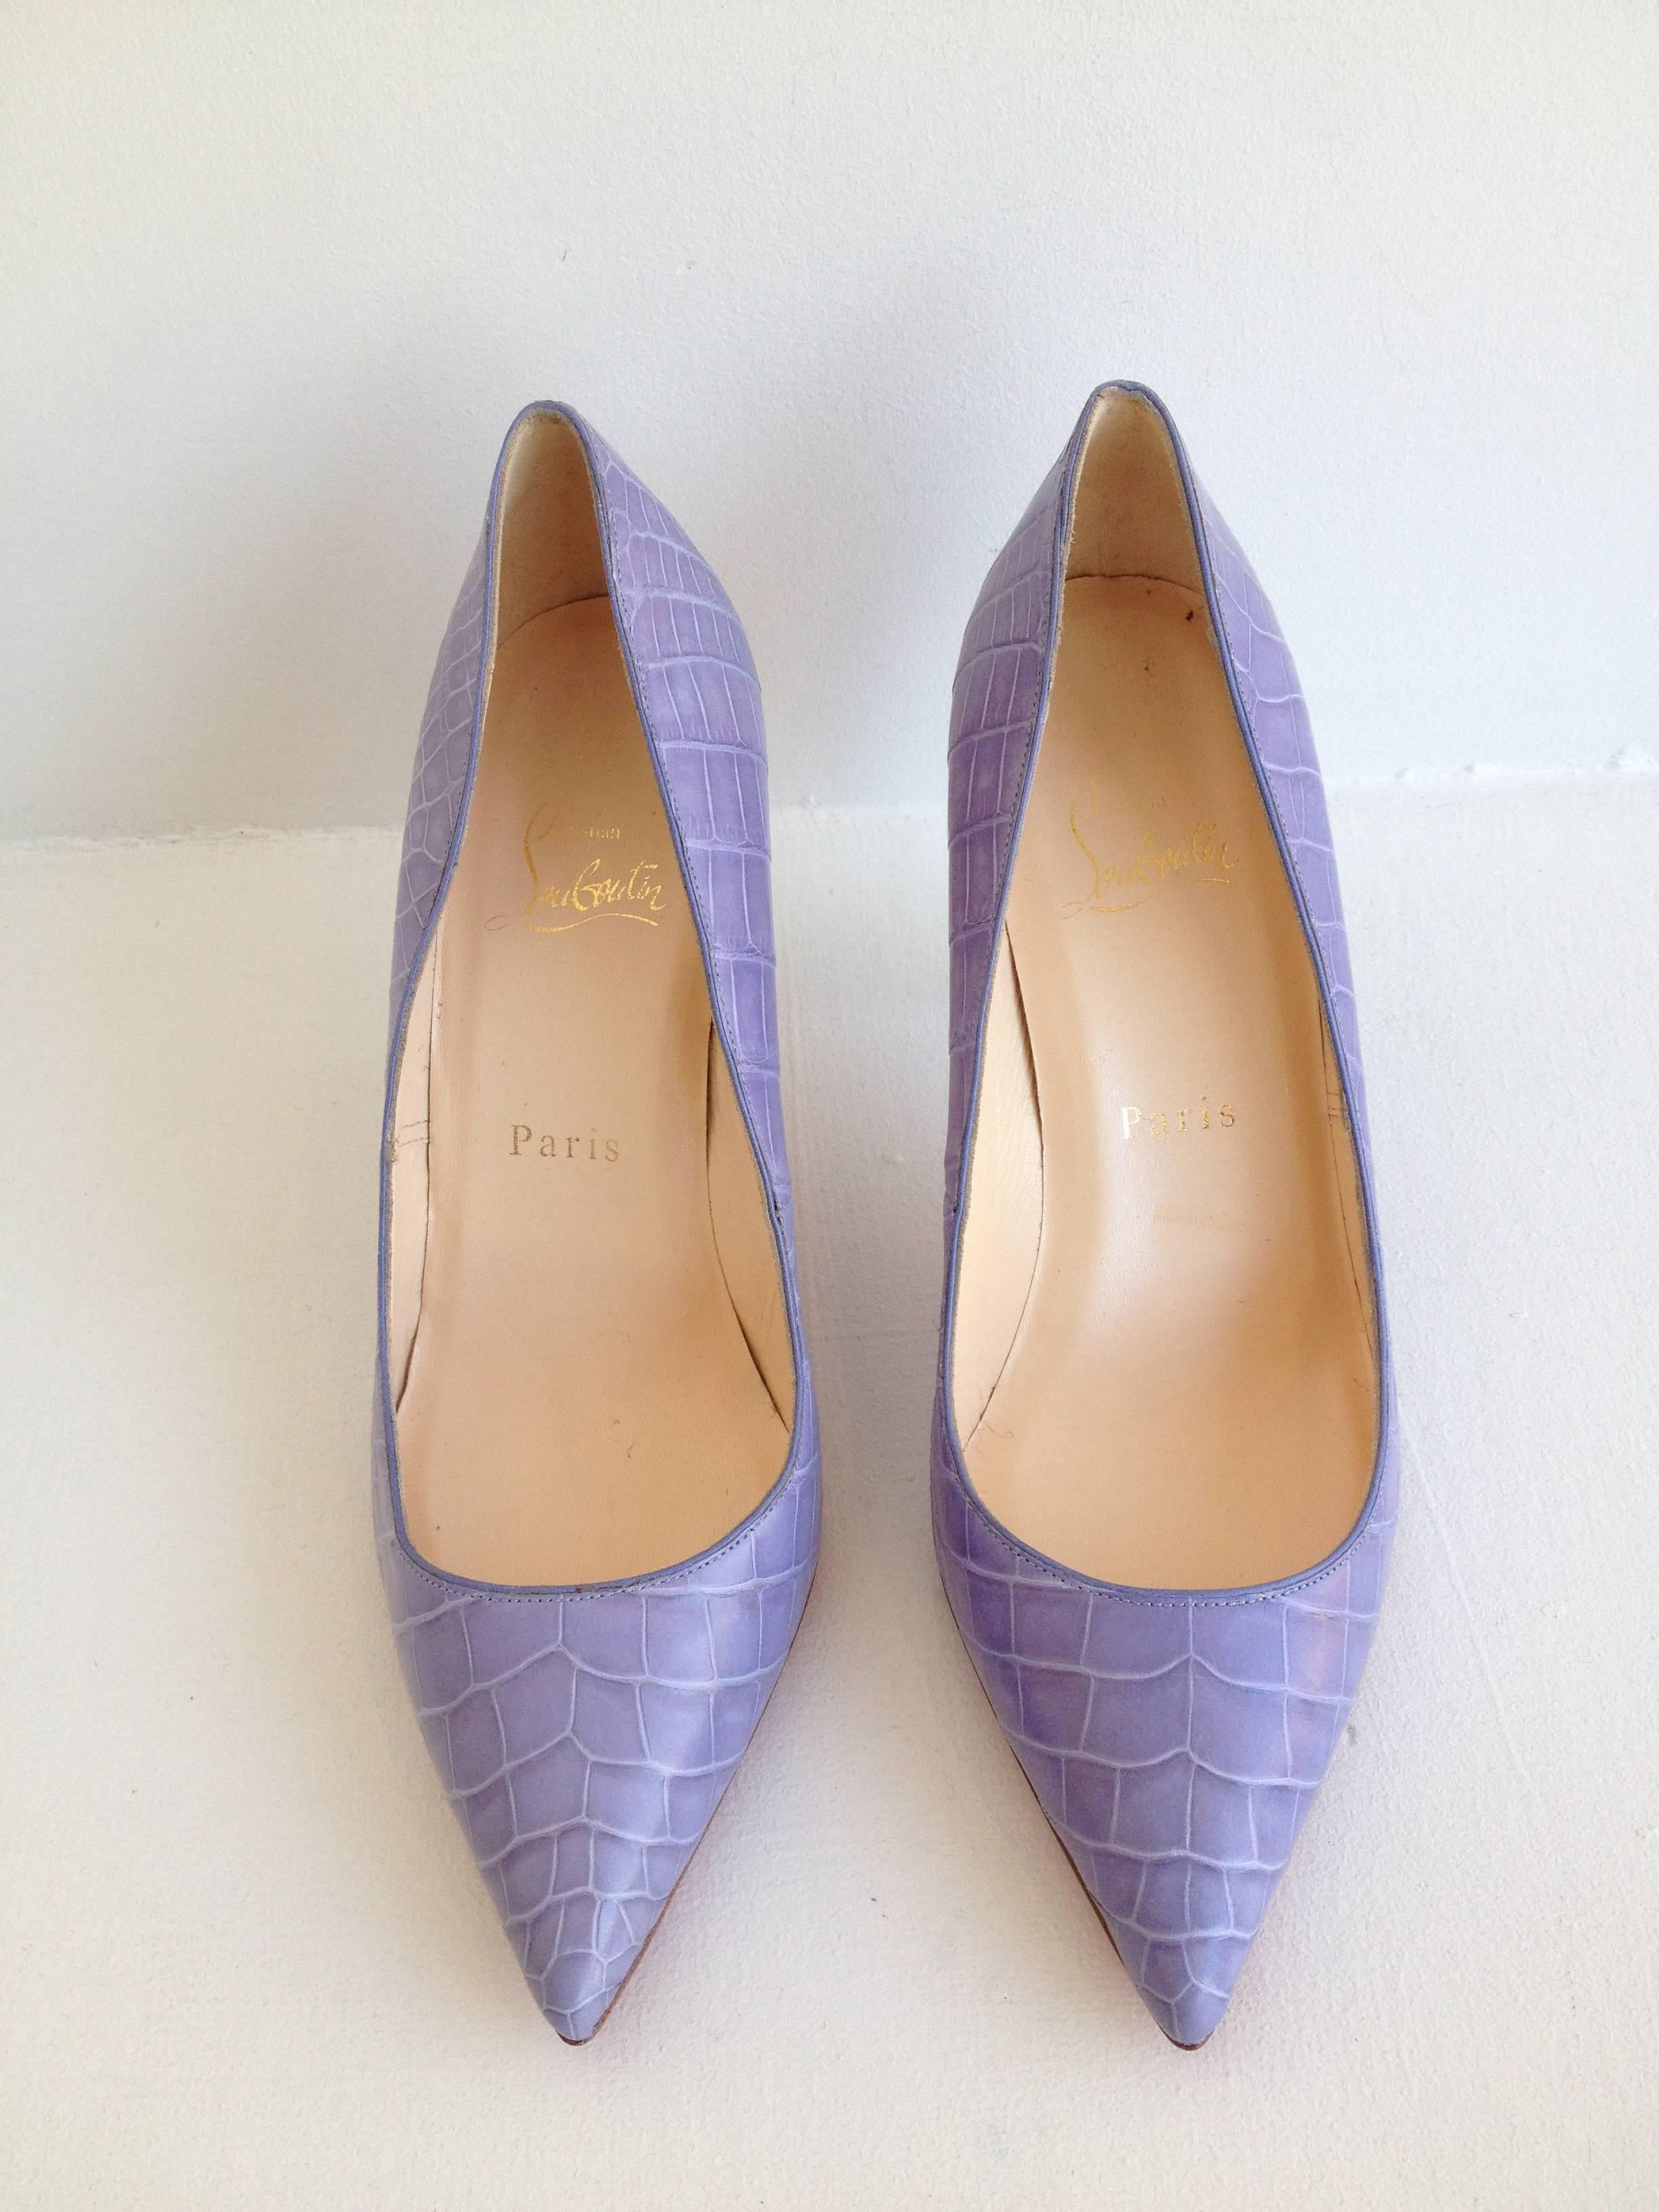 It's hard to think of a more perfect shoe than this one. Soft and sweet lavender contrasts with the classically luxurious crocodile skin, which is cut into a timelessly sleek silhouette with a pointed toe and sharp 3.5 inch stiletto heel. These are